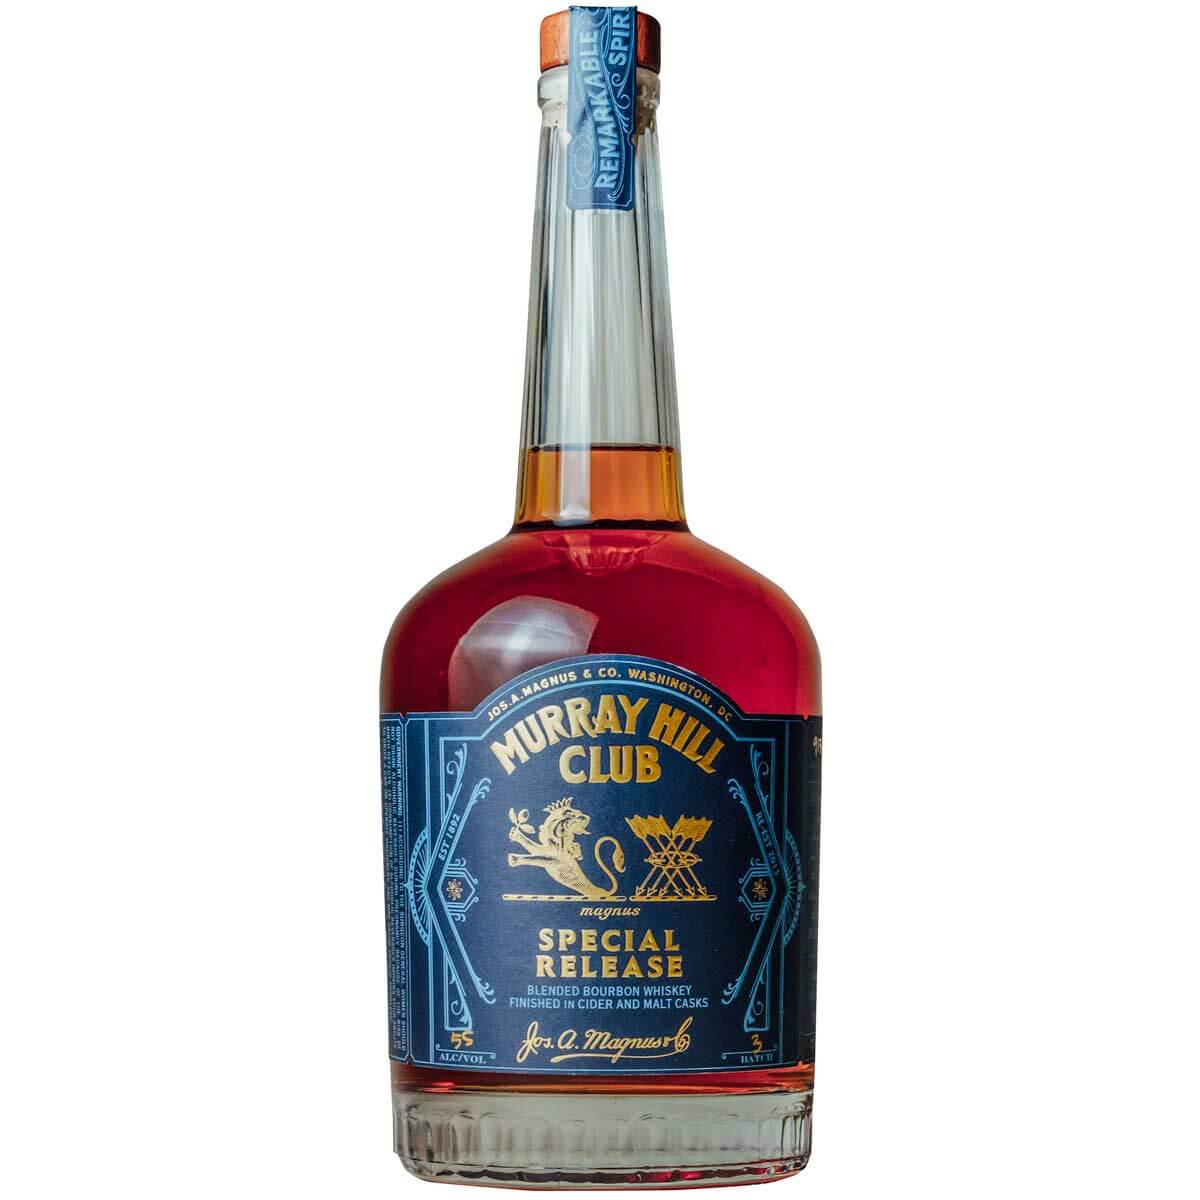 Murray Hill Club Special Release bottle